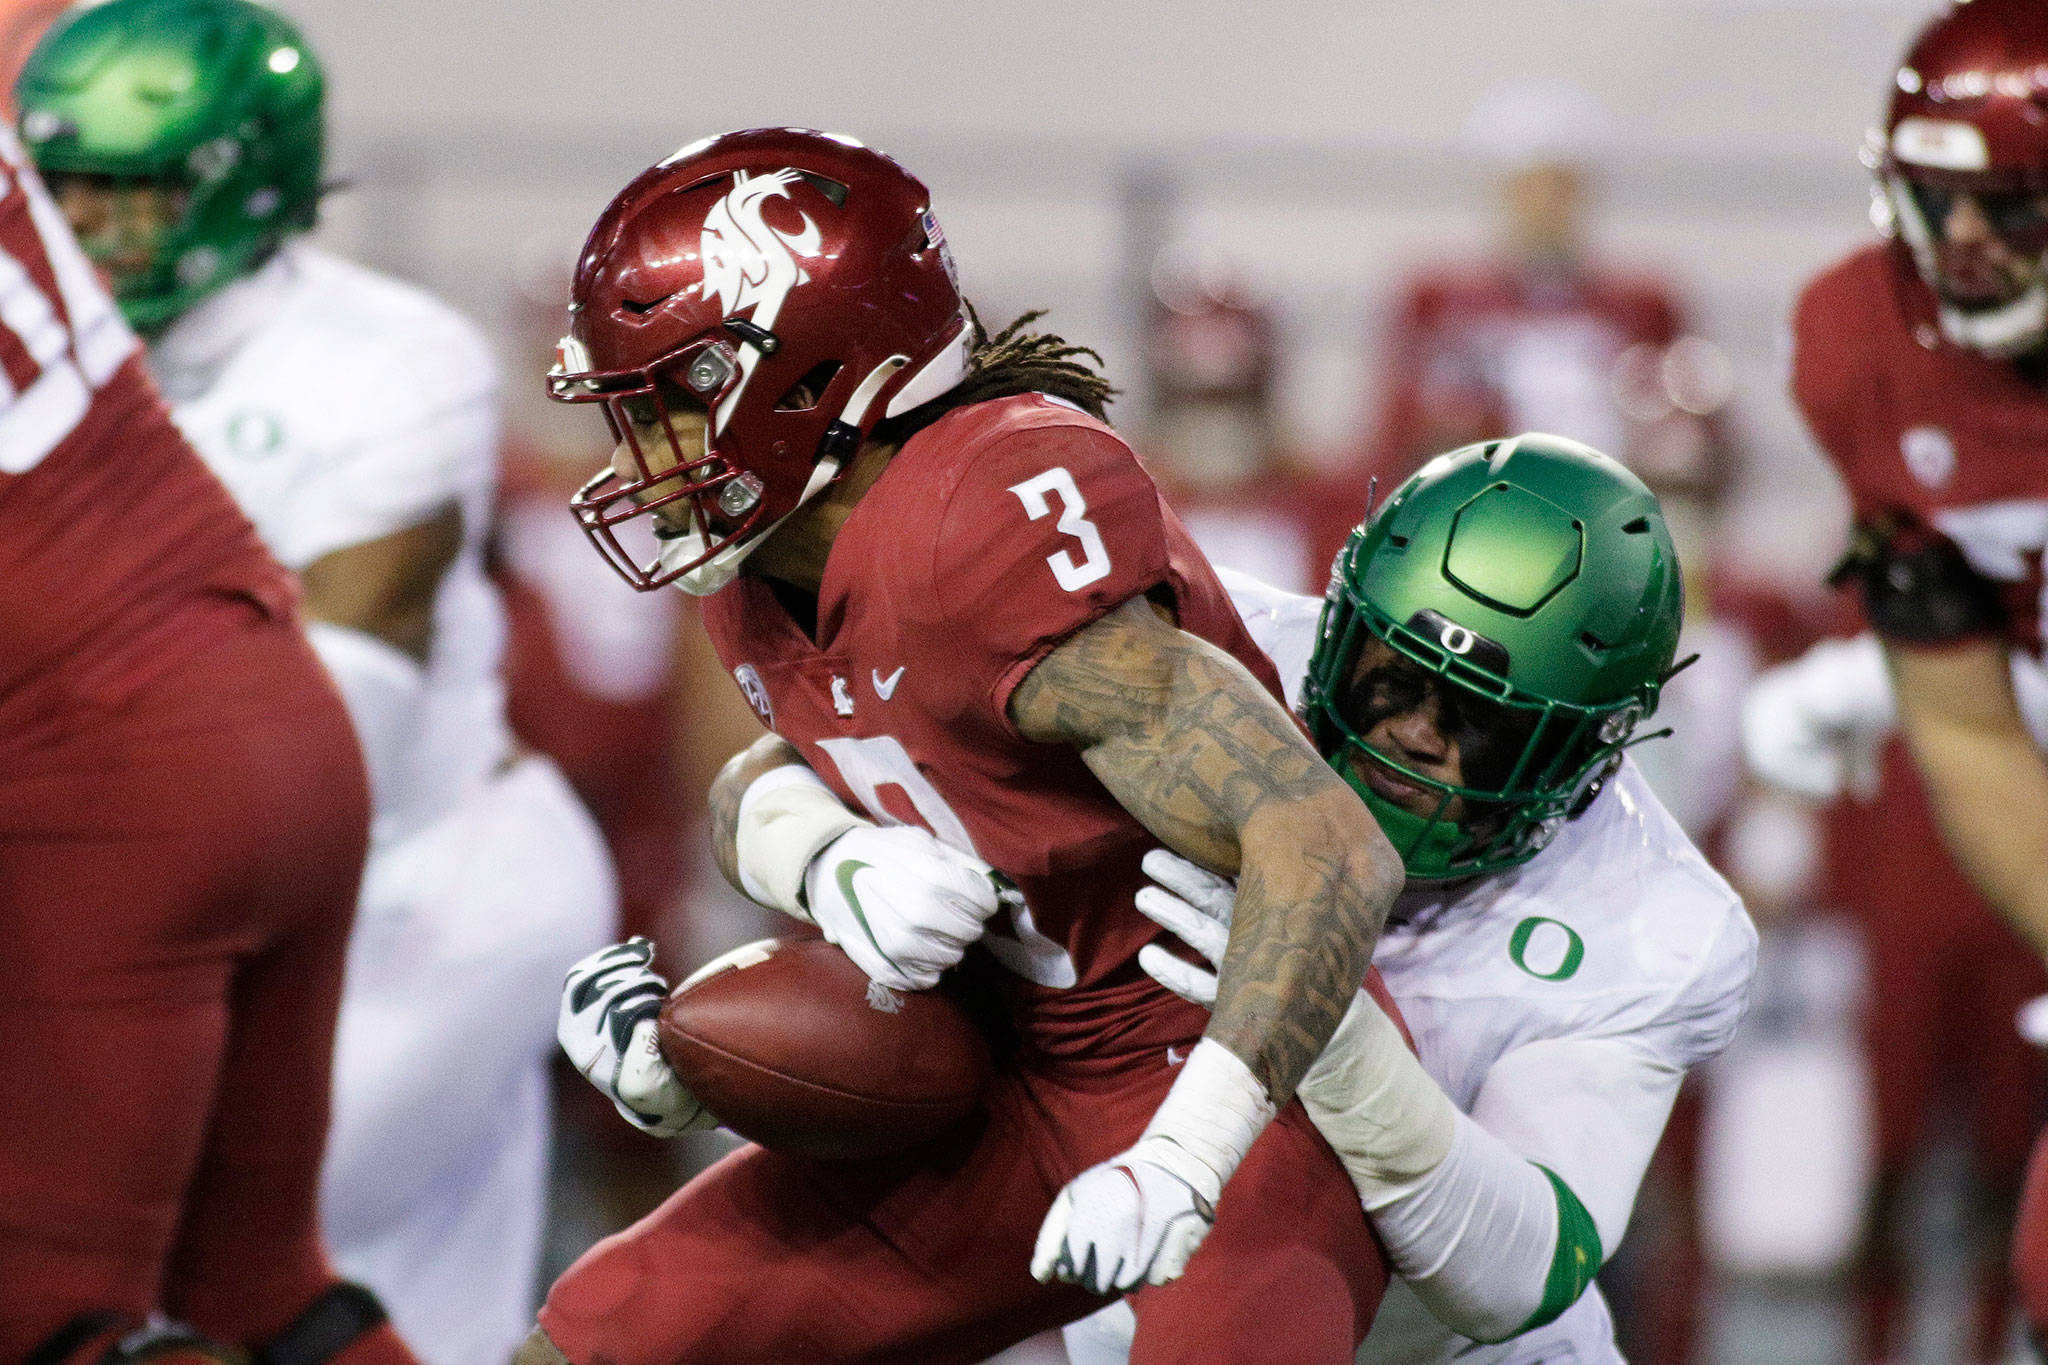 Oregon linebacker Noah Sewell (right) tackles Washington State running back Deon McIntosh during the second half of a game Nov. 14, 2020, in Pullman. (AP Photo/Young Kwak)